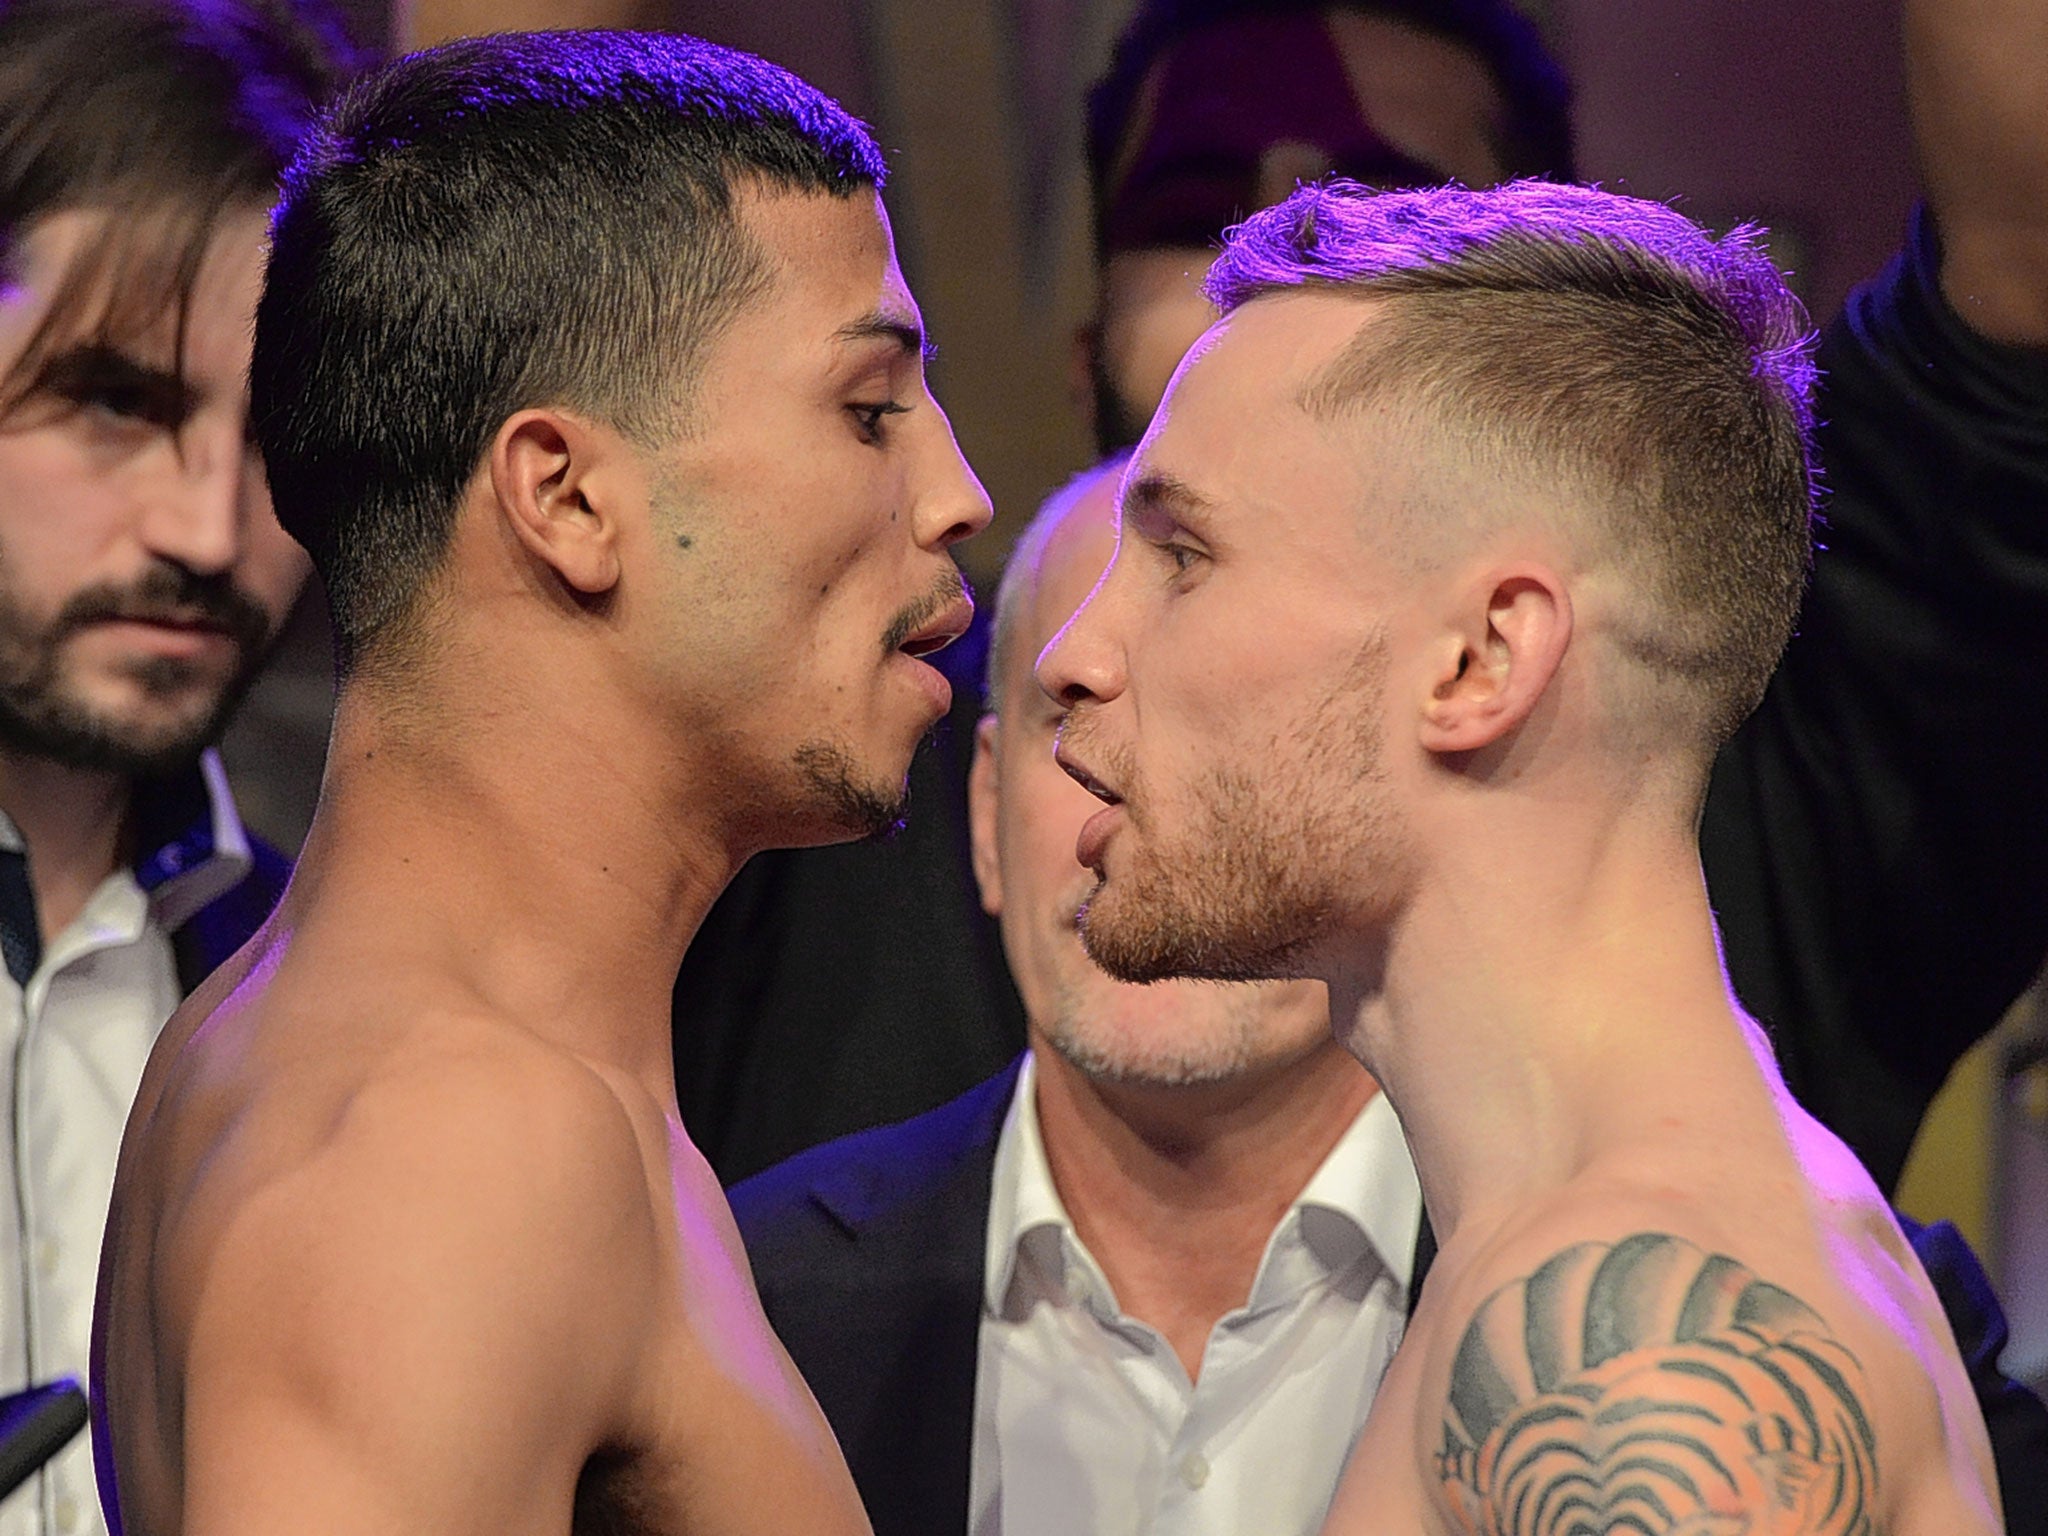 Carl Frampton (right) and Chris Avalos face off at their fiery pre-fight weigh-in on Friday in Belfast